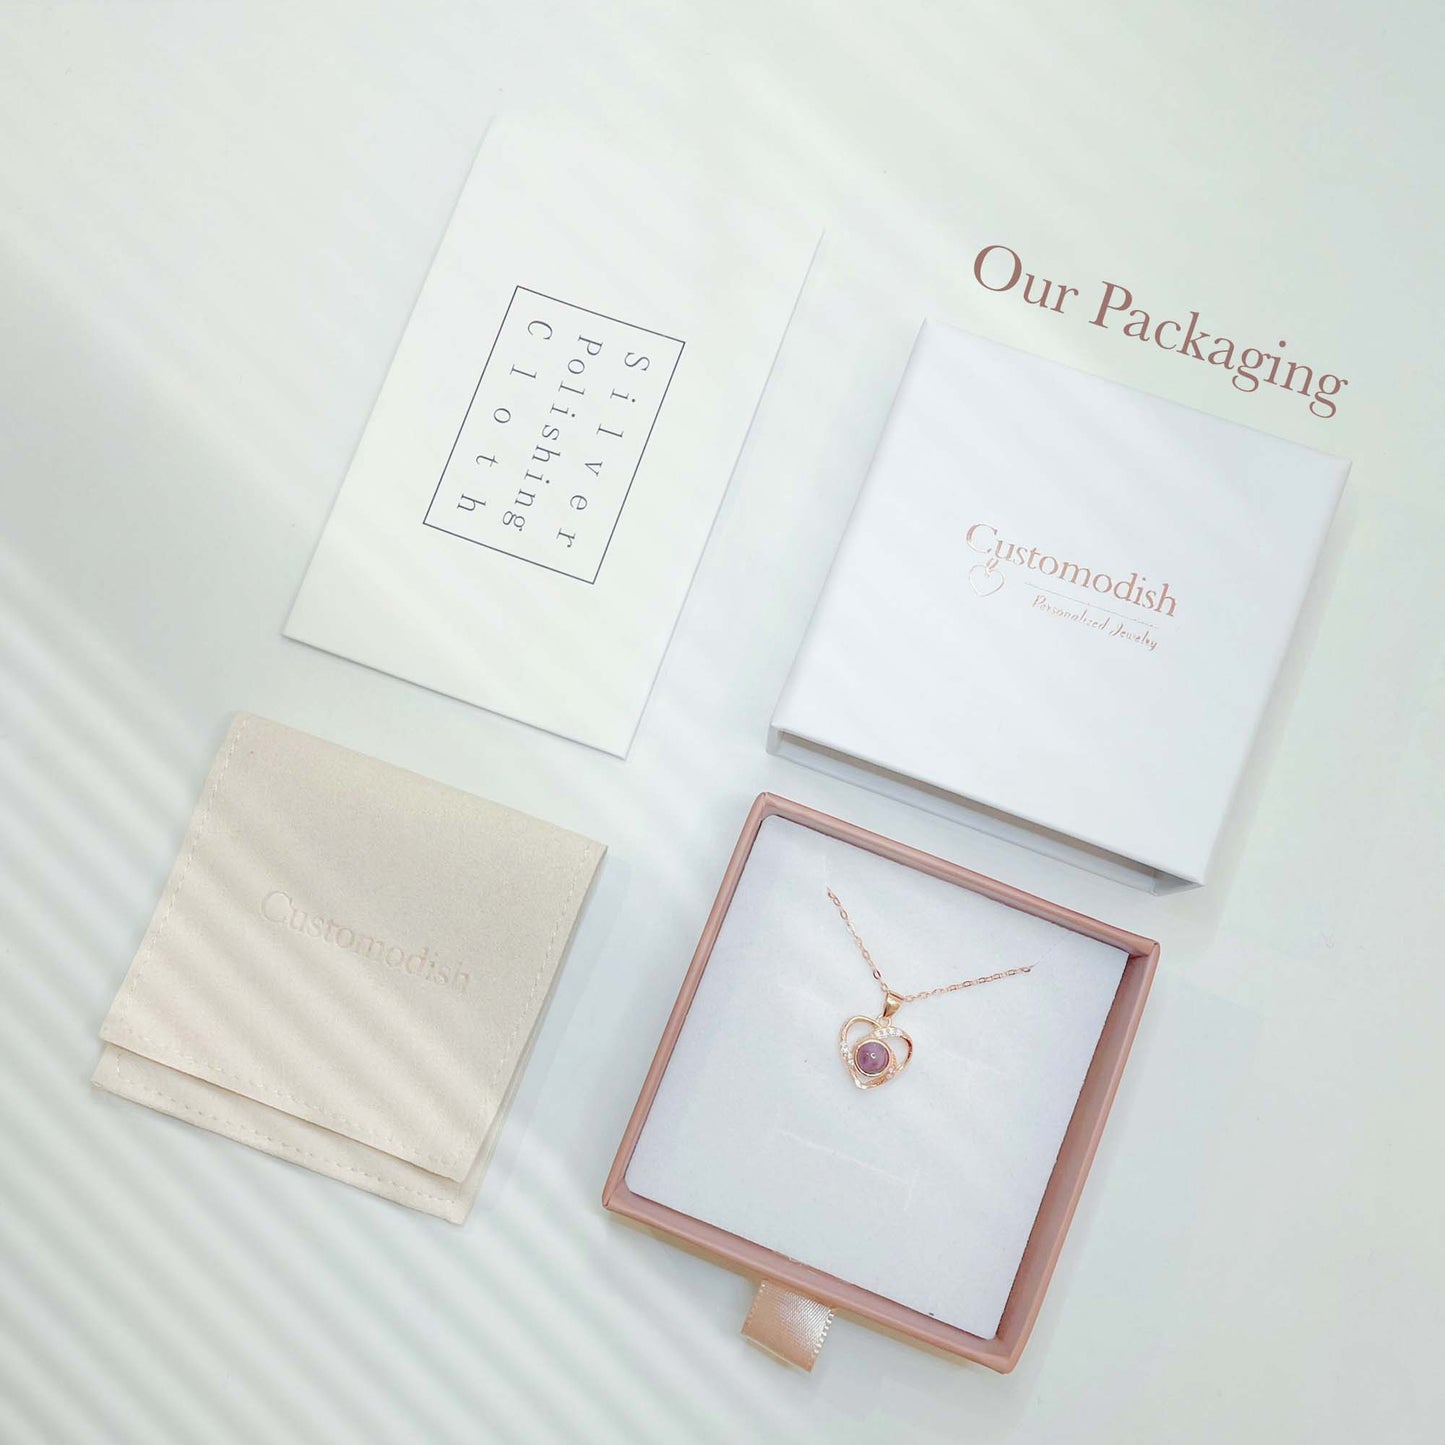 Your photo projection necklaces will come well packed.